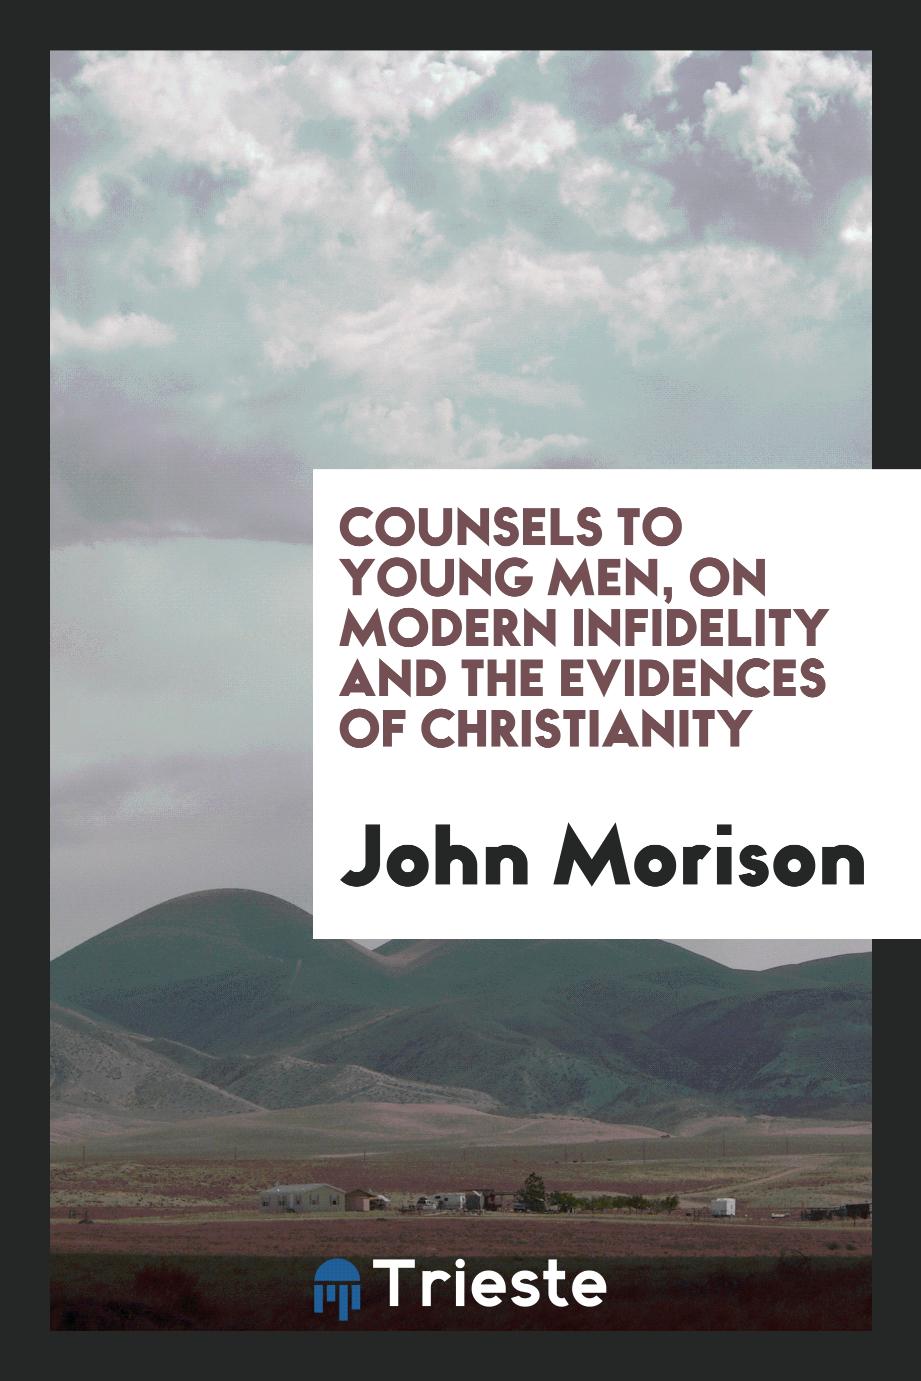 Counsels to young men, on modern infidelity and the evidences of Christianity